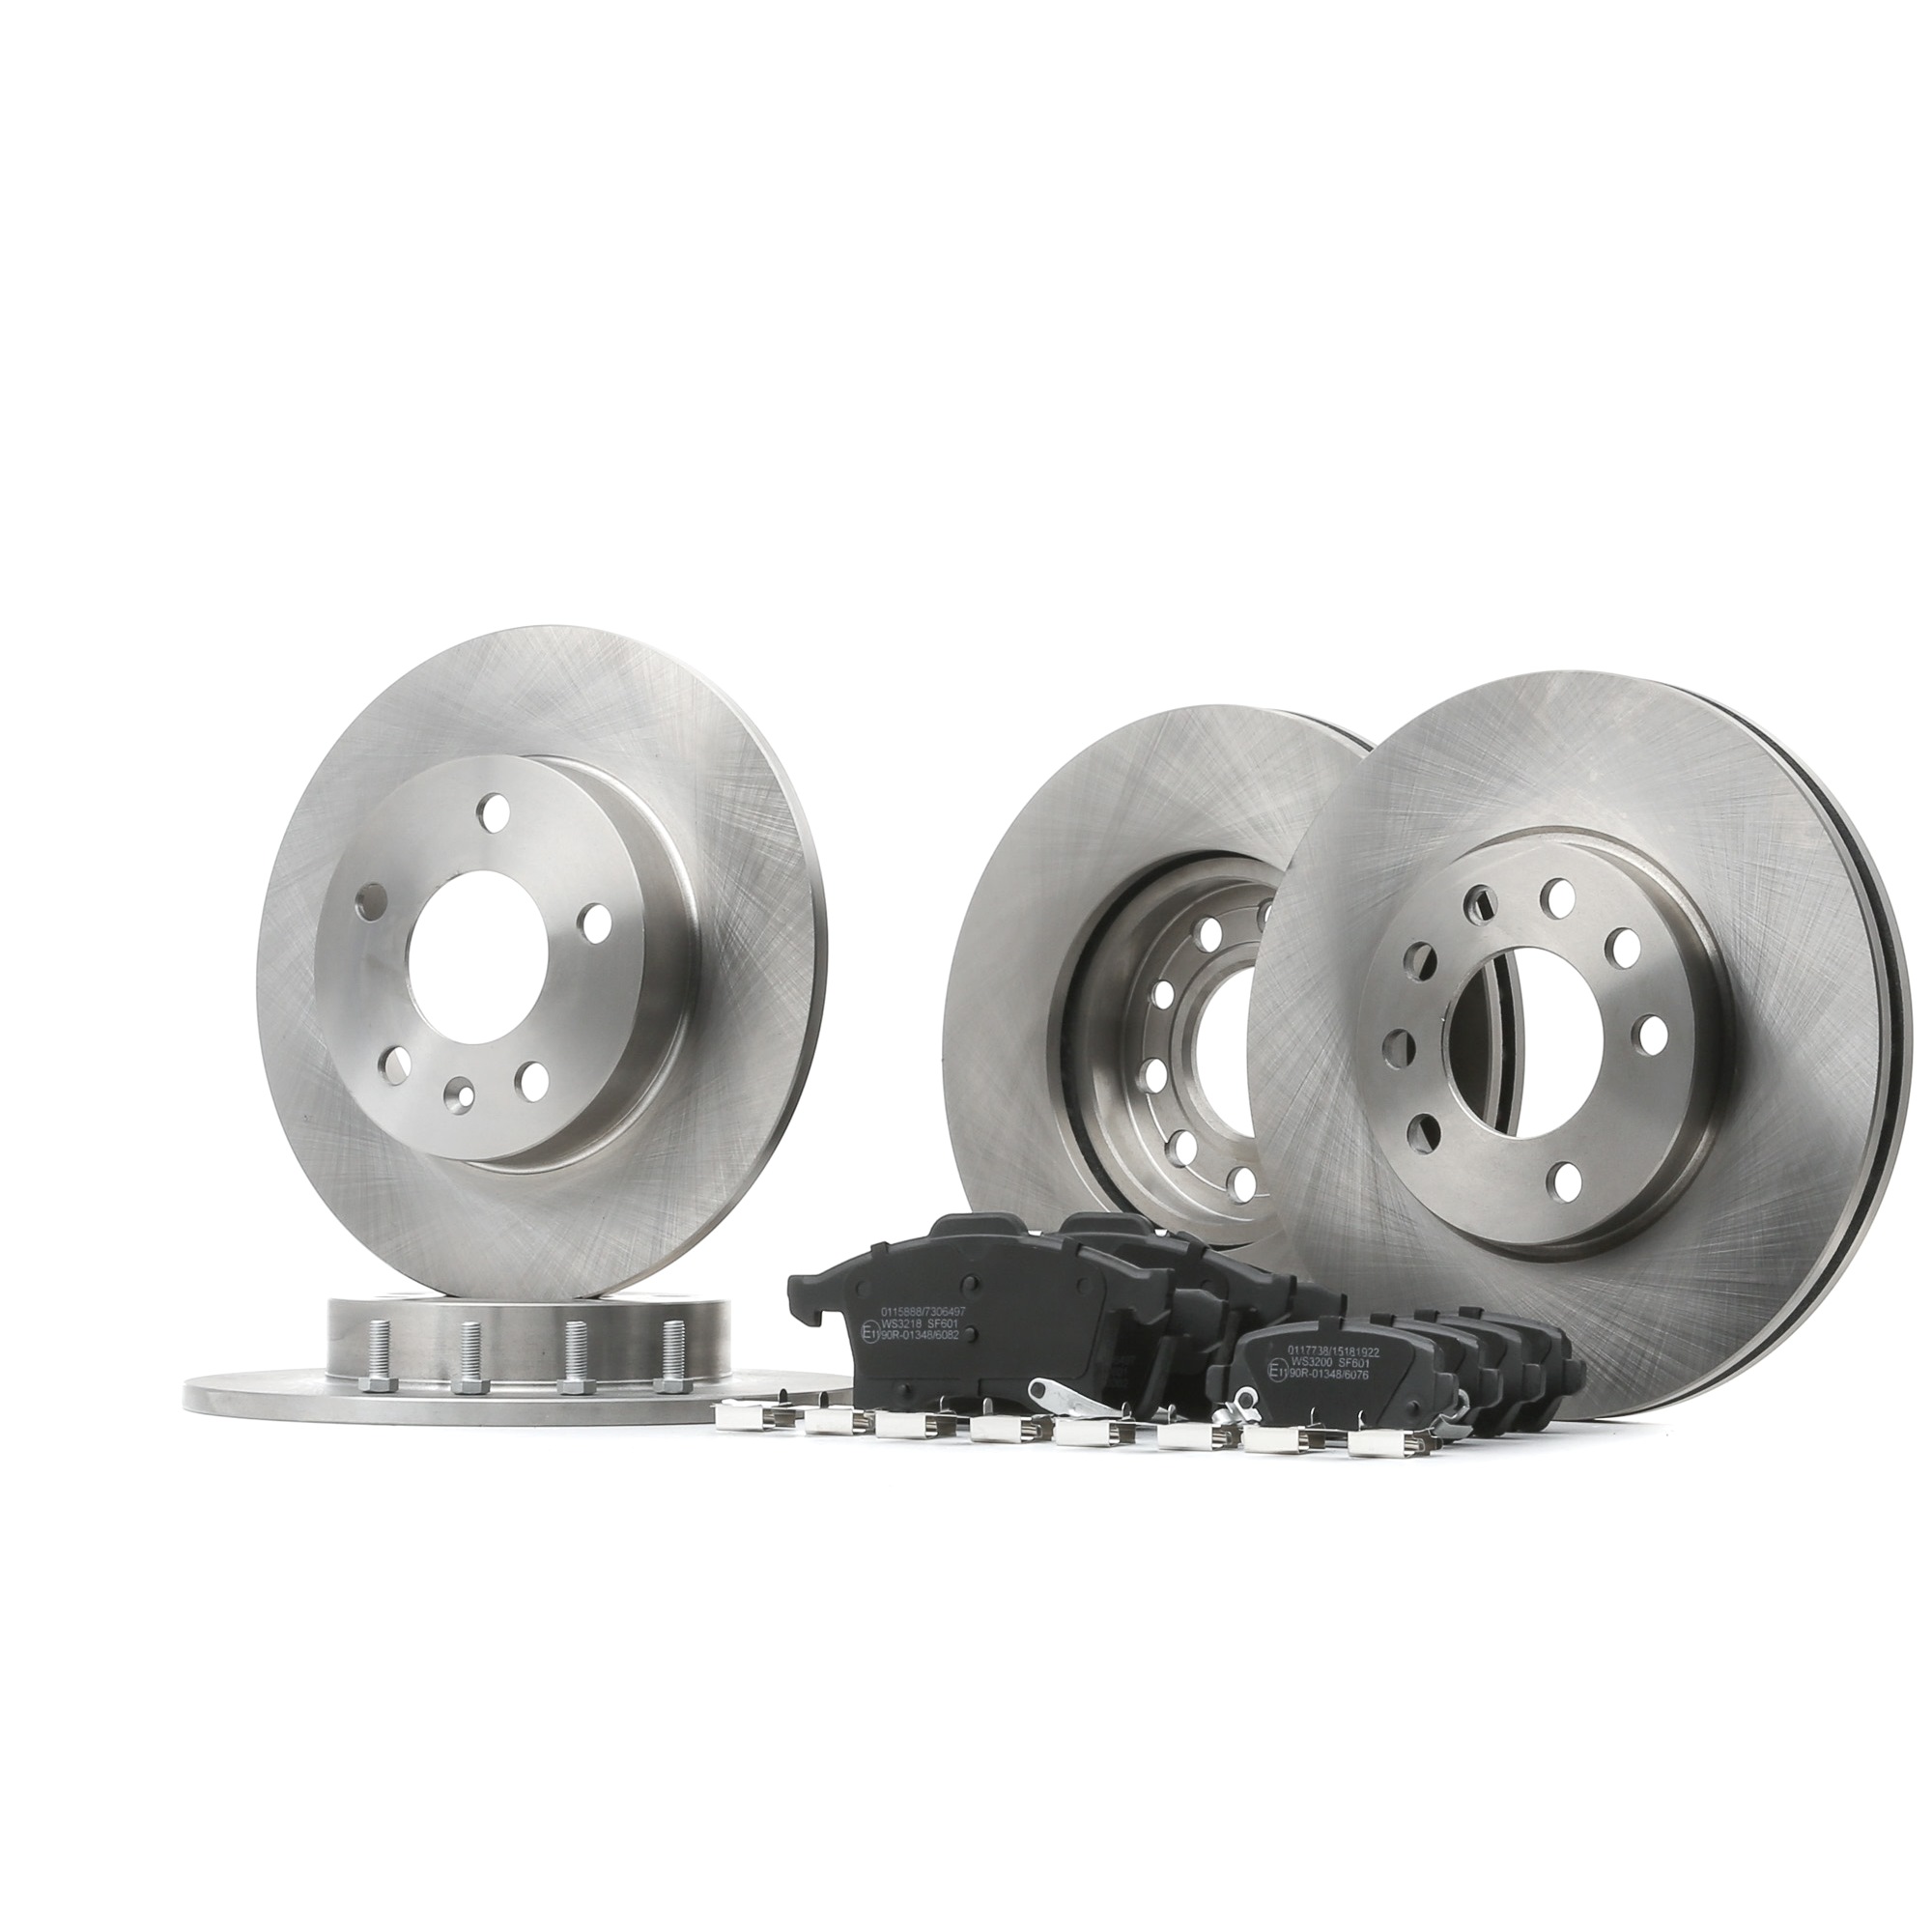 STARK SKBK-10990445 Brake discs and pads set Front Axle, Rear Axle, Vented, solid, without integrated wear warning contact, with acoustic wear warning